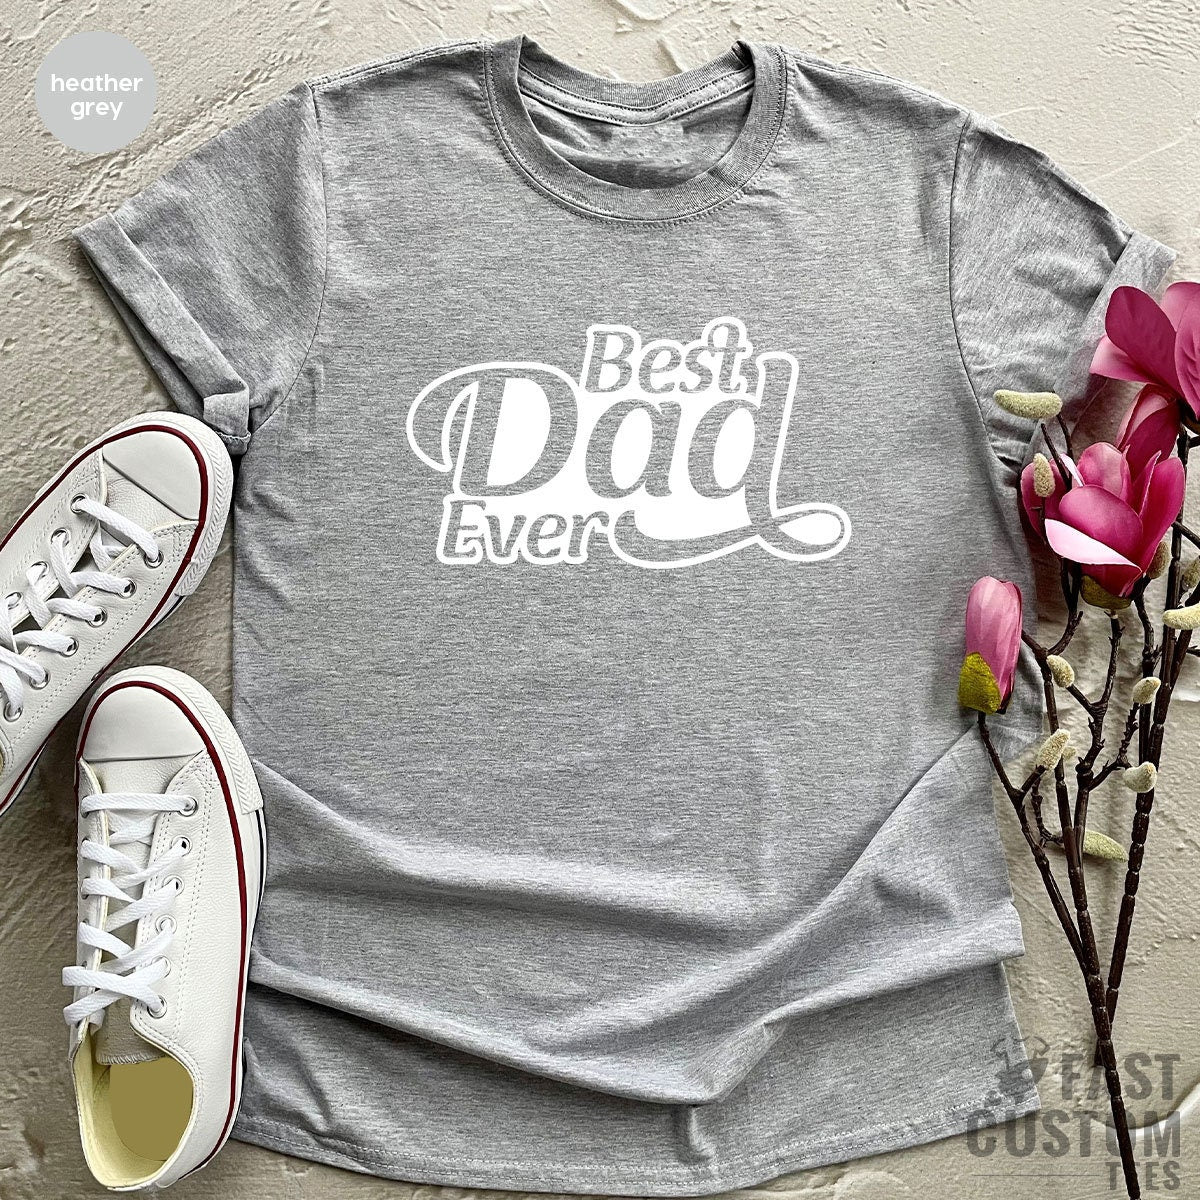 Dad Shirt, Dad Gift, Gift For Dad, Fathers Day Shirt, Fathers Day Gift, New Dad Gift, Best Dad Ever, Best Dad Shirt, Dad To Be Shirt - Fastdeliverytees.com